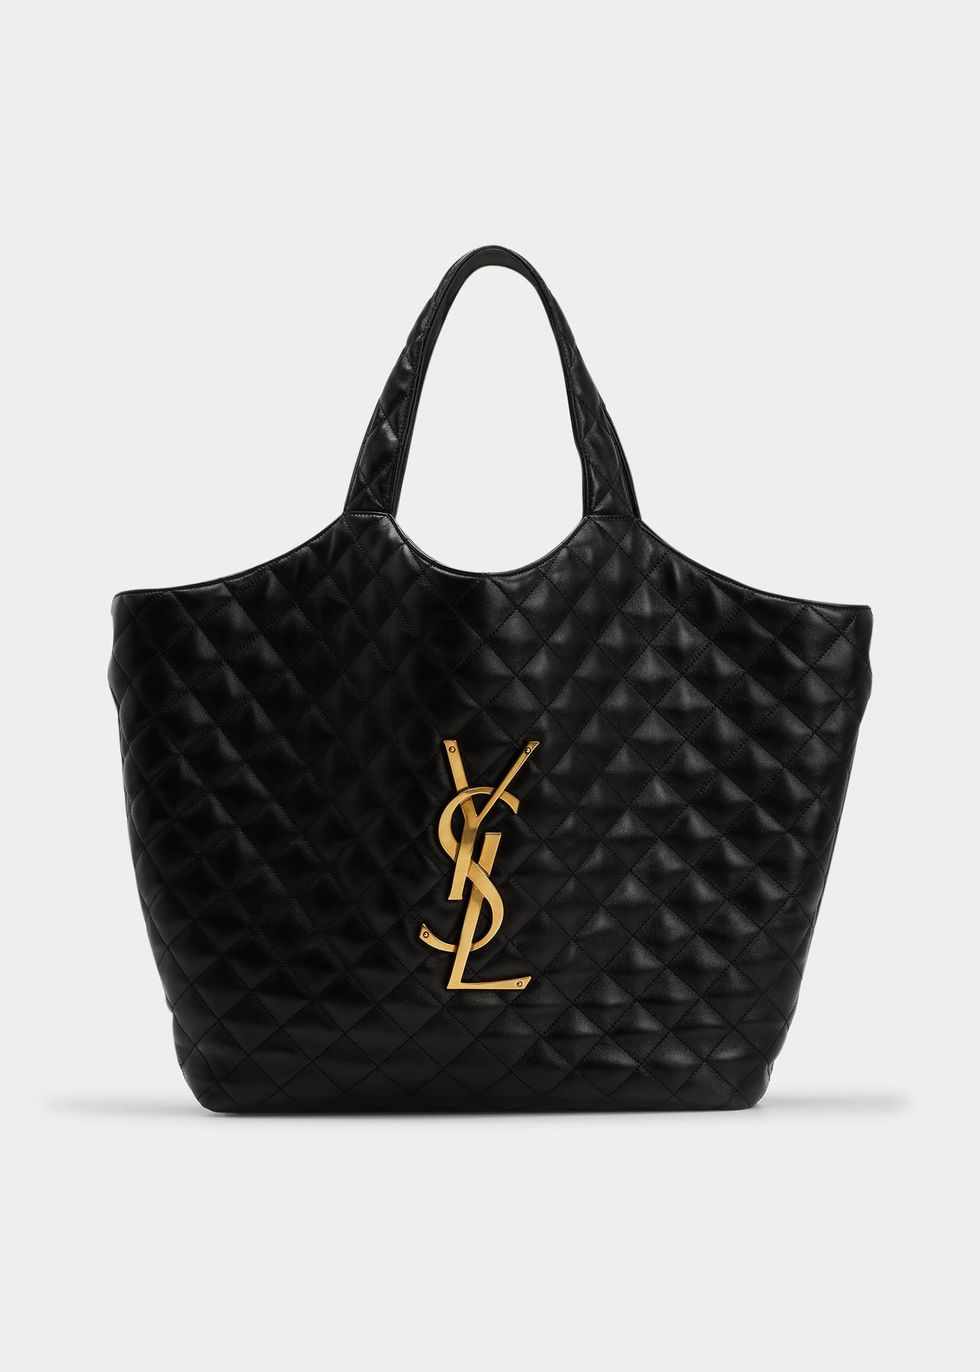 The Ultimate Saint Laurent Icare Bag Review To Read Before Buying - CLOSS  FASHION